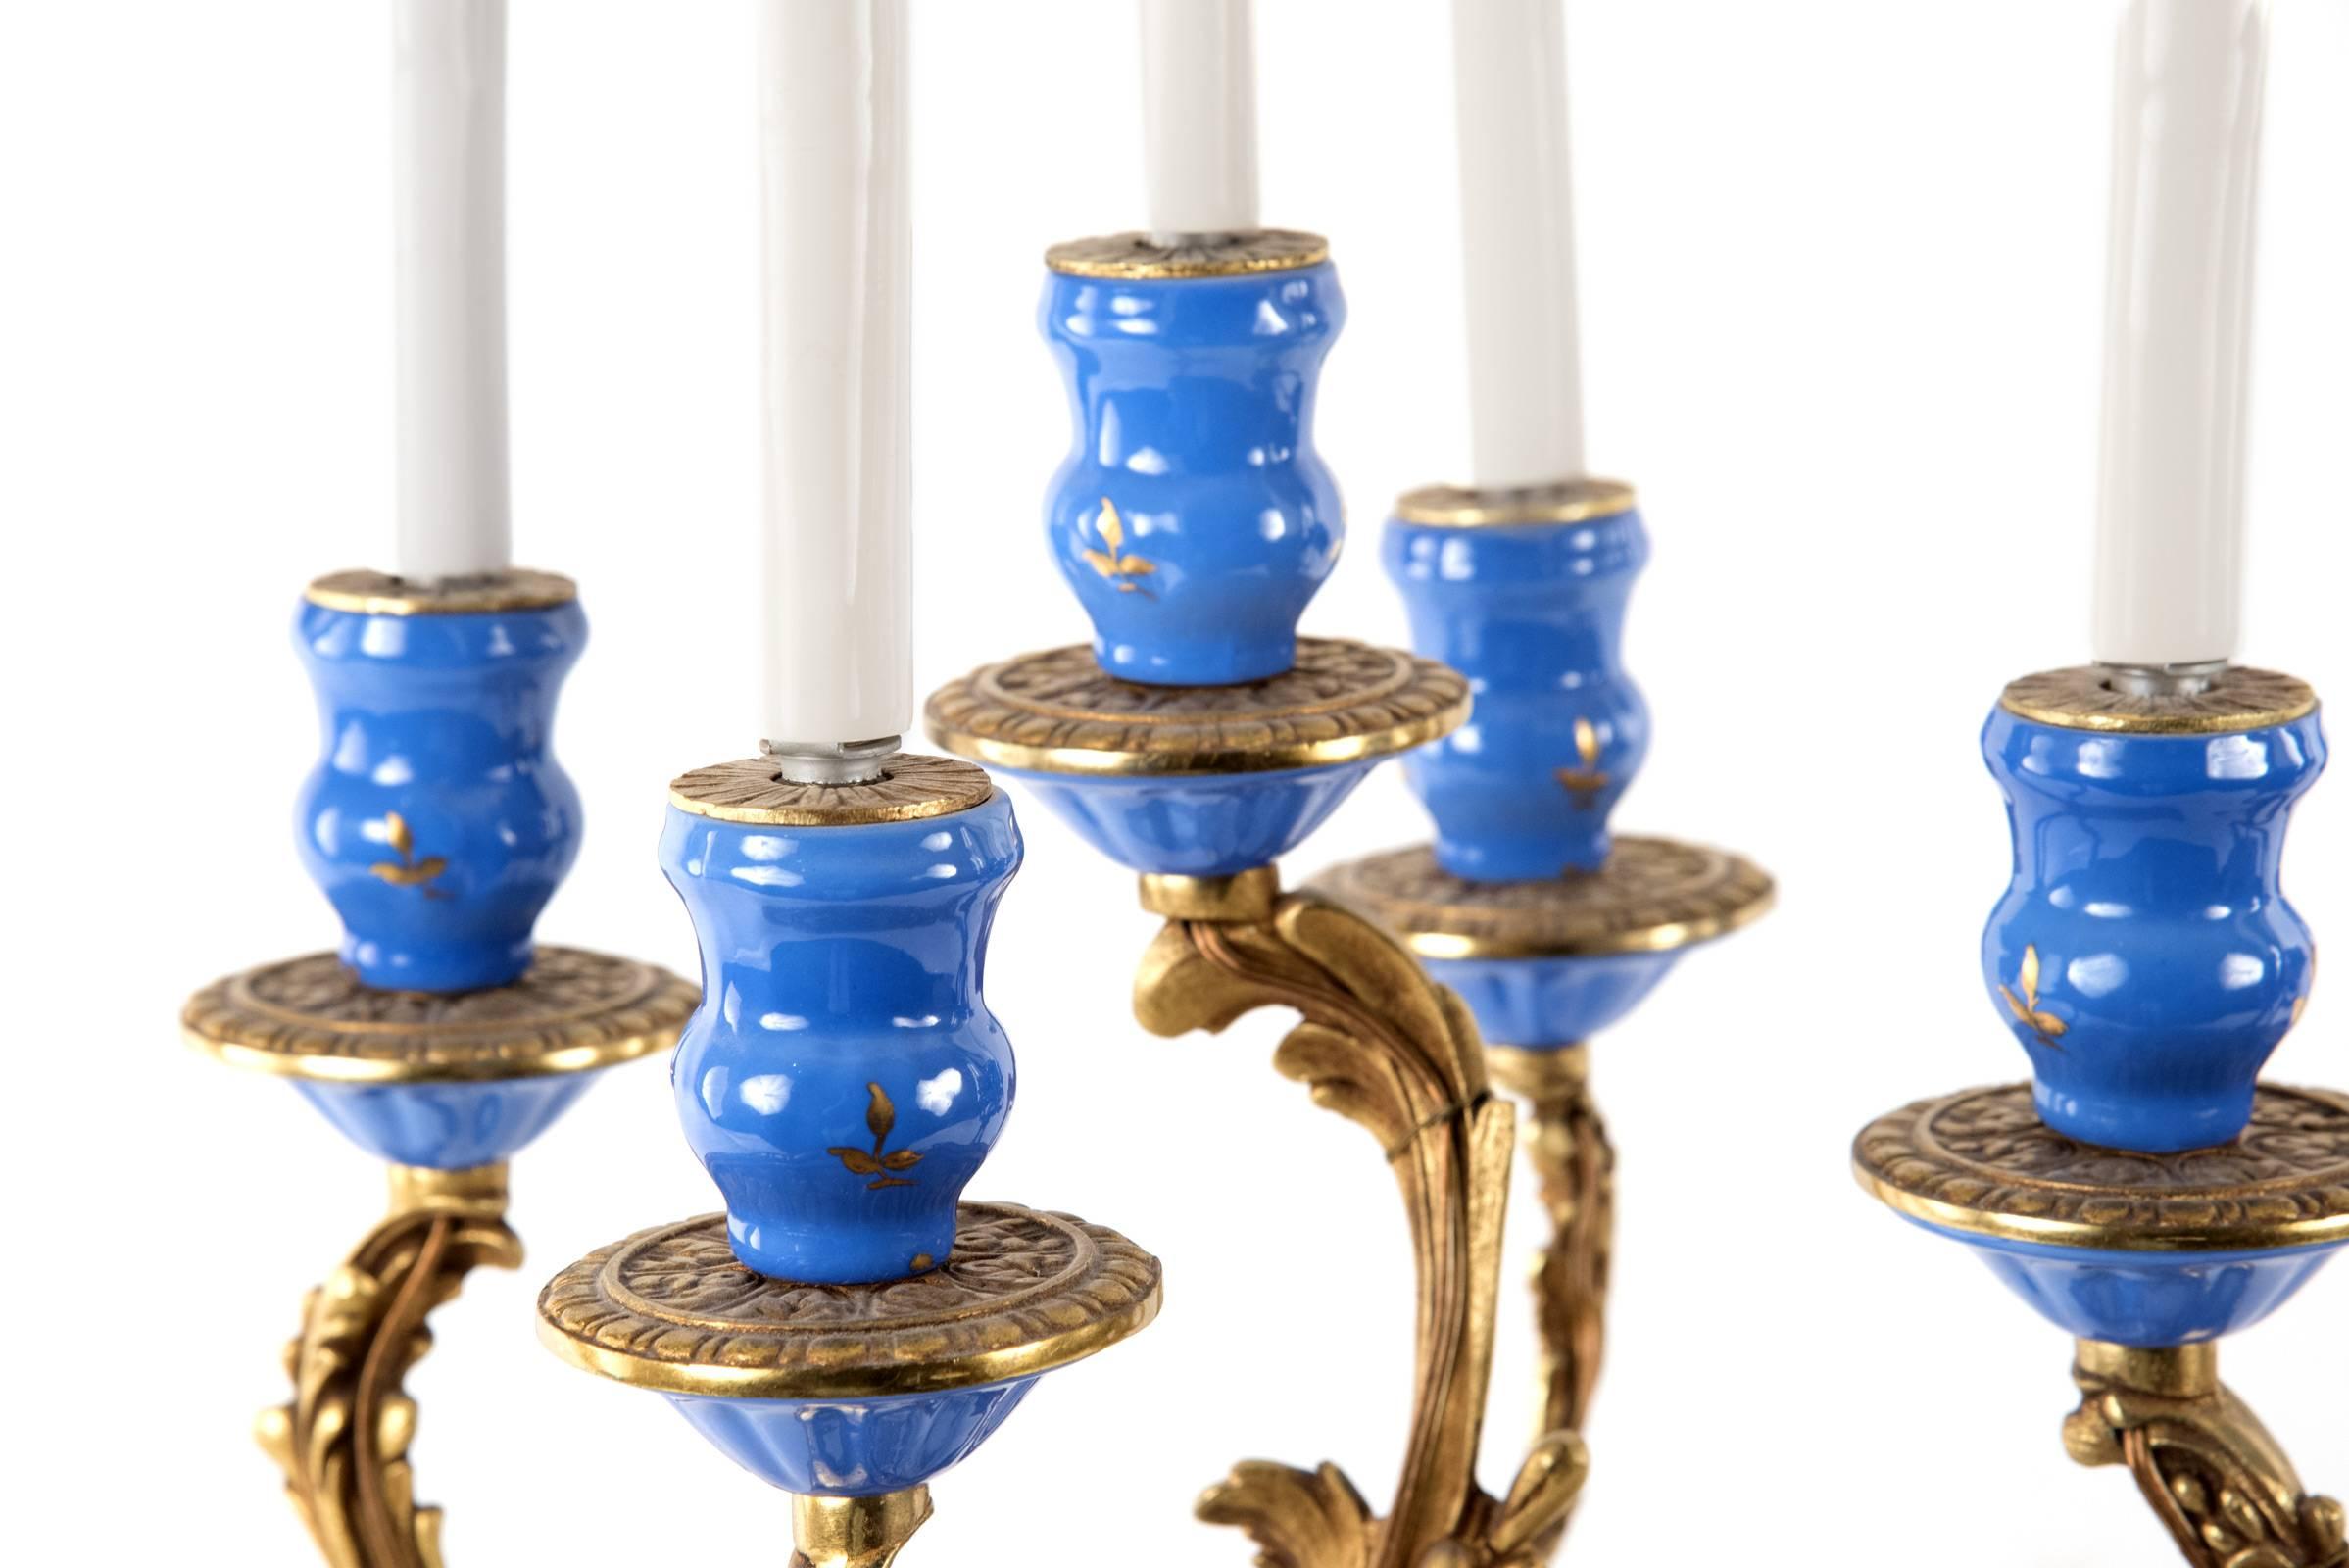 Rococo Revival Sevres-Style Porcelain and Ormolu-Mounted Five-Light Candelabra